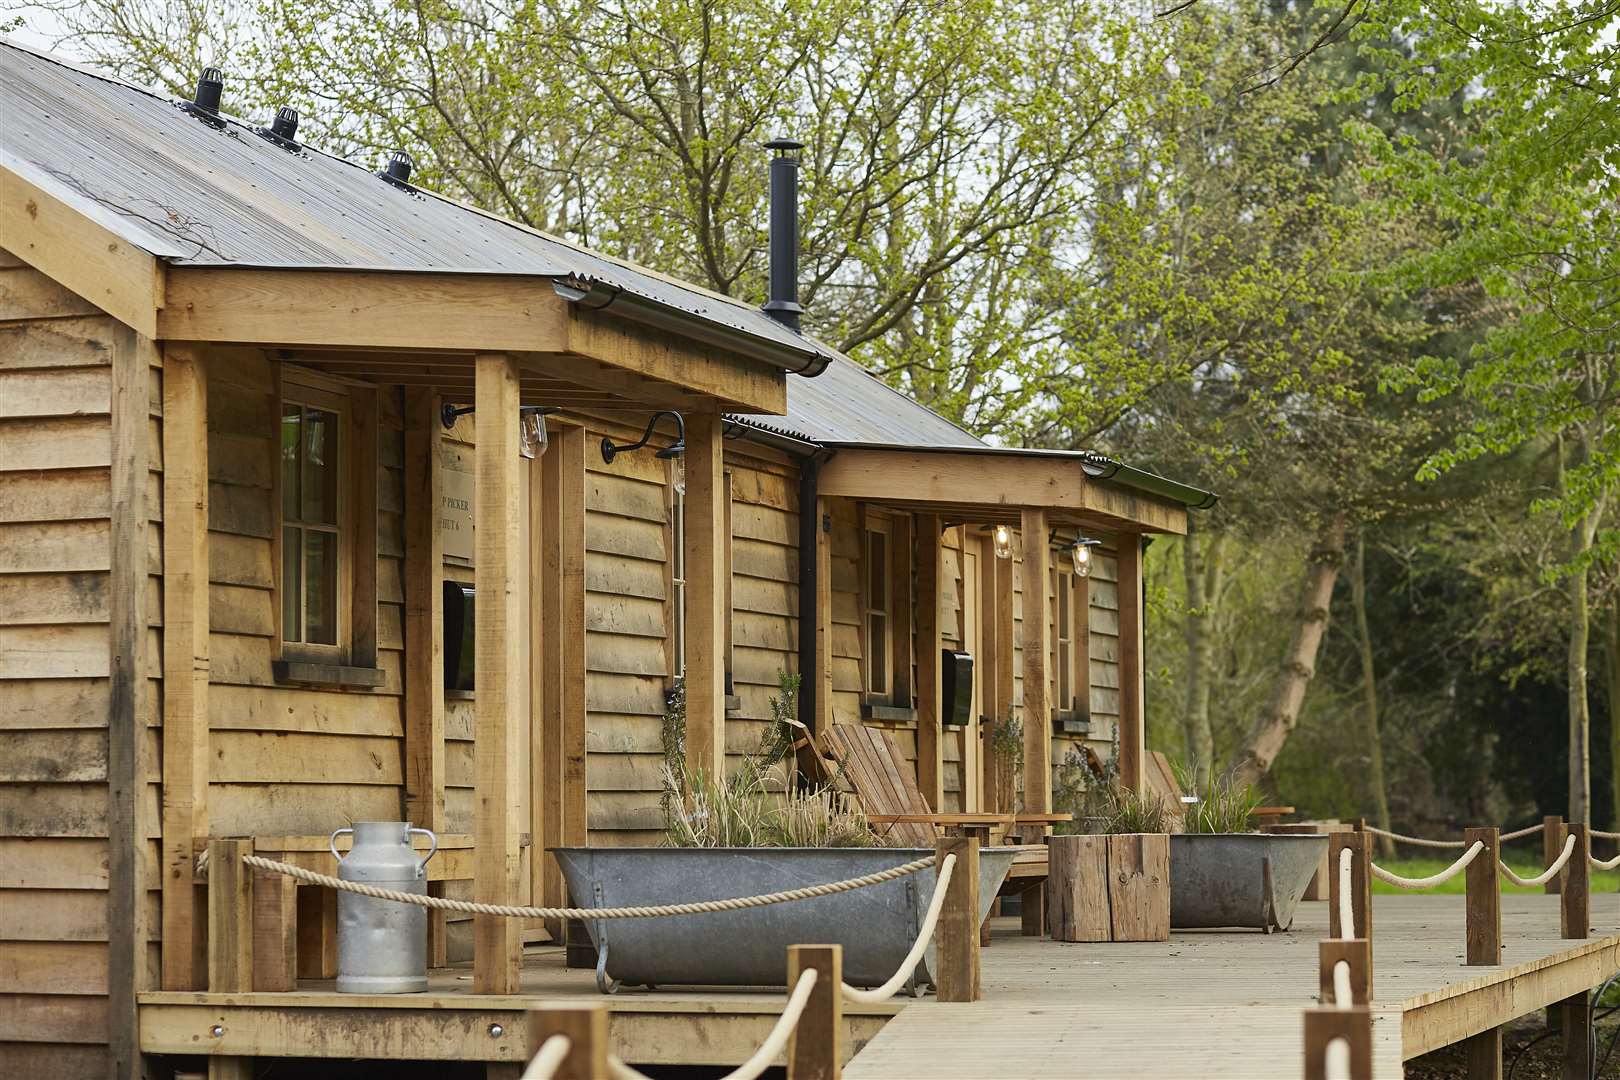 Rustic-looking 'hop pickers' huts have all mod cons and wood burning stoves